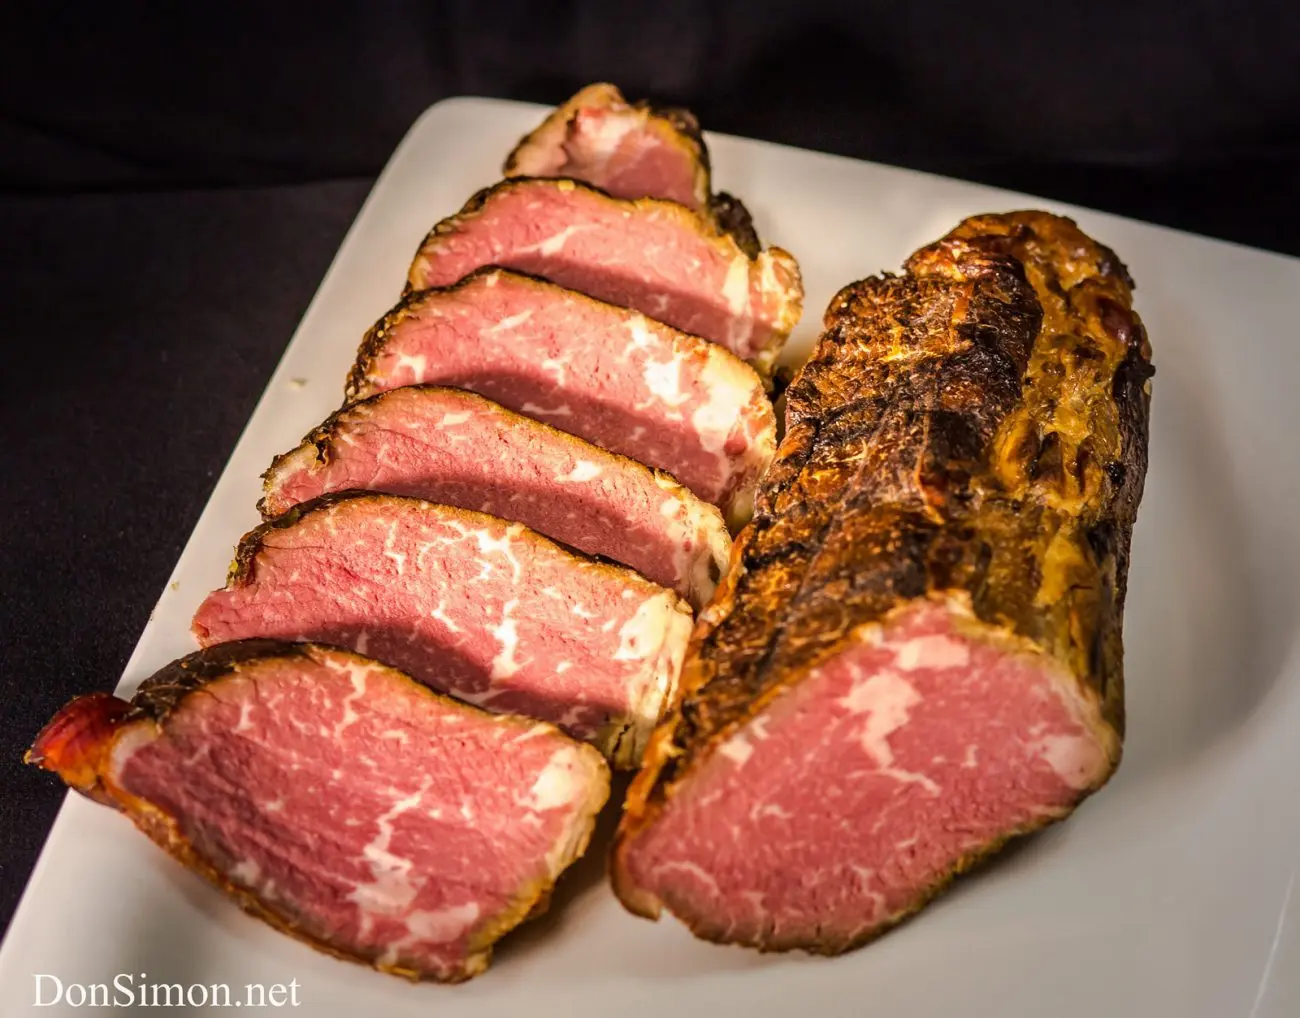 smoked cold cuts - Why are they called cold cuts